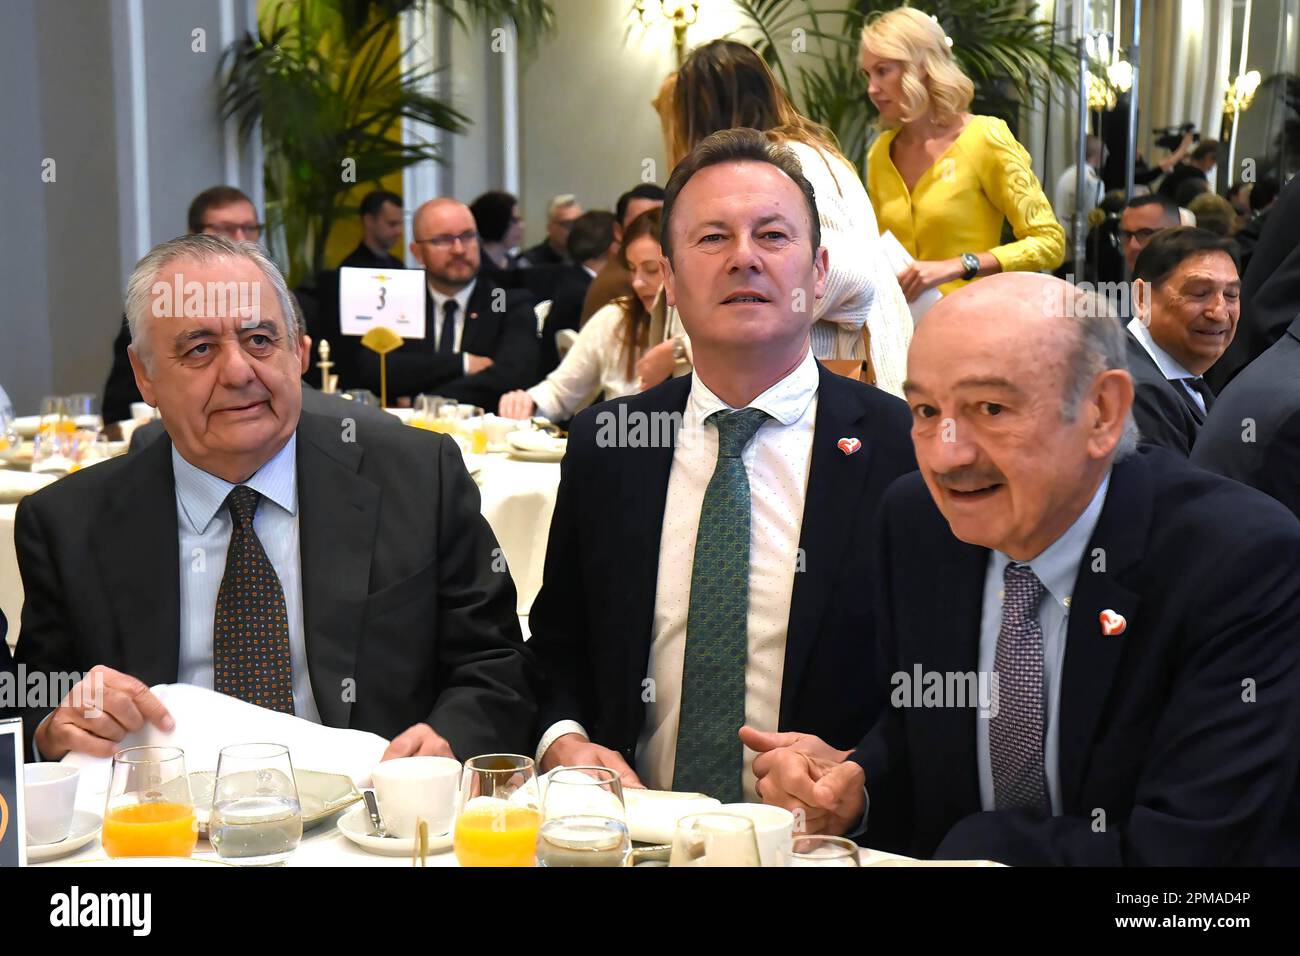 Madrid, Spain. 12th Apr, 2023. Guillermo Blanco Gomez, Minister of Rural Affairs (C) and José María Mazón (R), member of the congress of deputies at the presidential table of the Ritz hotel during the presentation. The president of Cantabria, together with colleagues from the Cantabrian Regionalist Party, presented his candidacy for re-election in Madrid. Credit: SOPA Images Limited/Alamy Live News Stock Photo